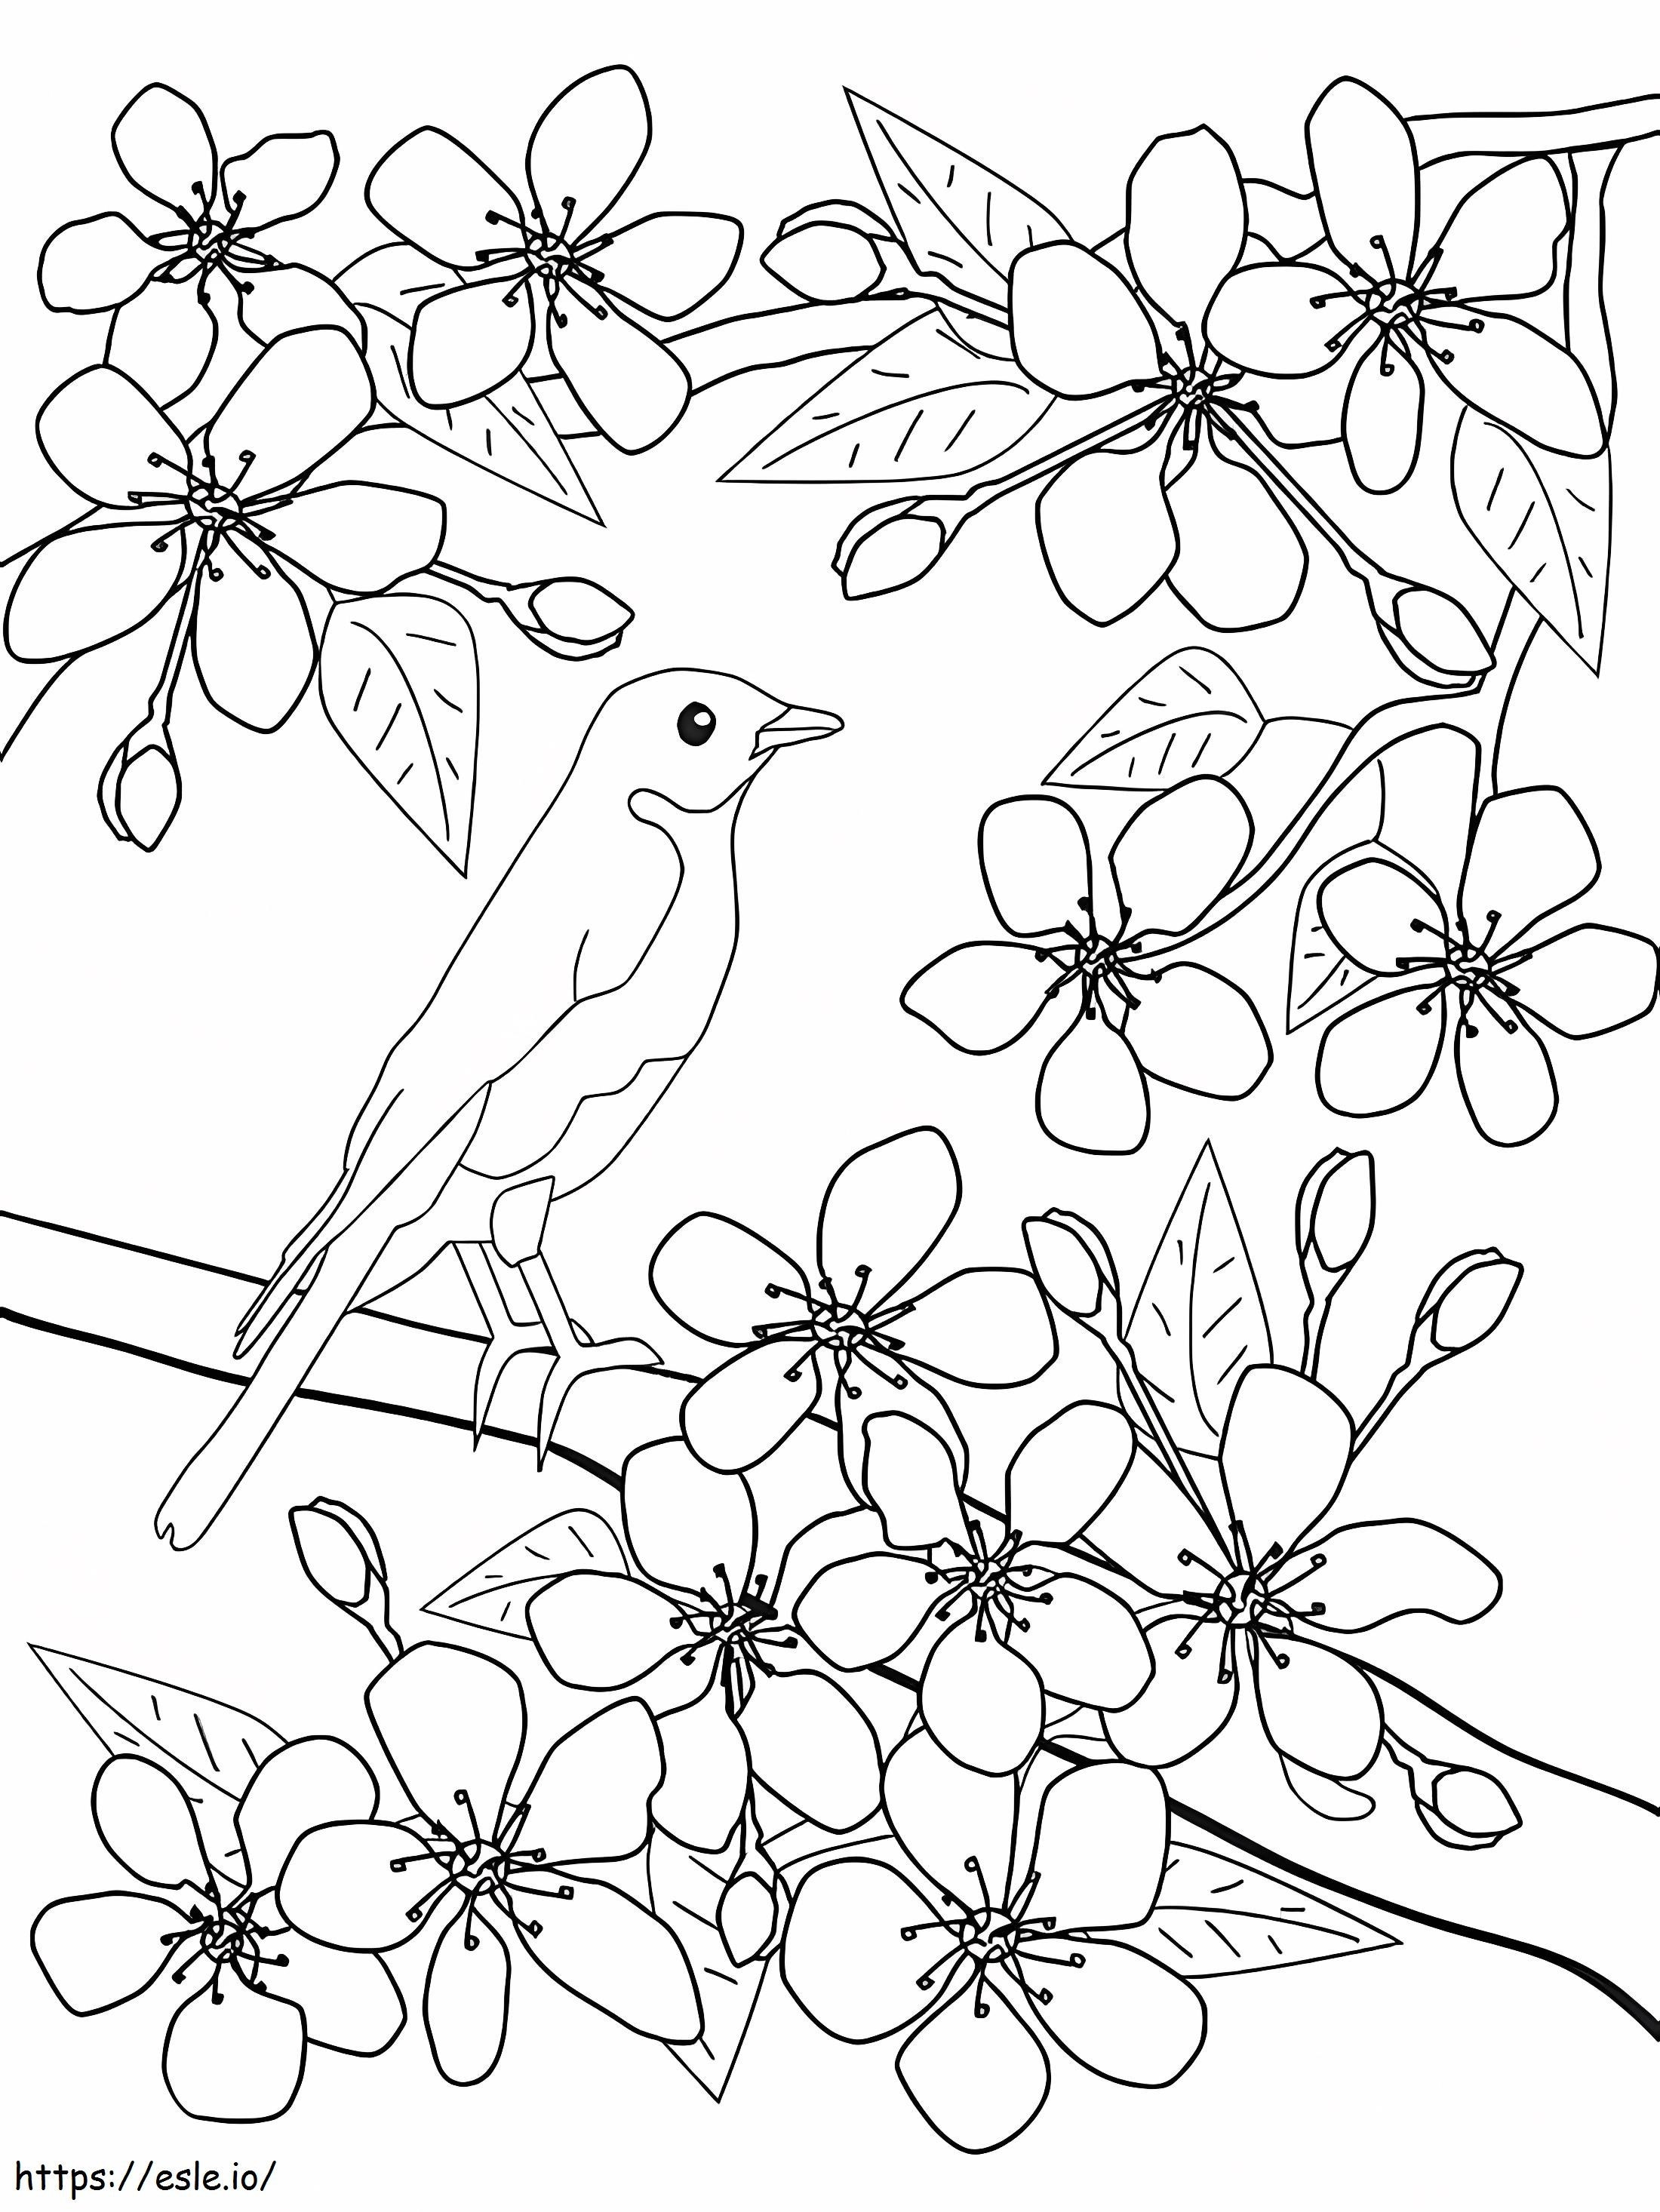 Bird And Flower In Spring coloring page